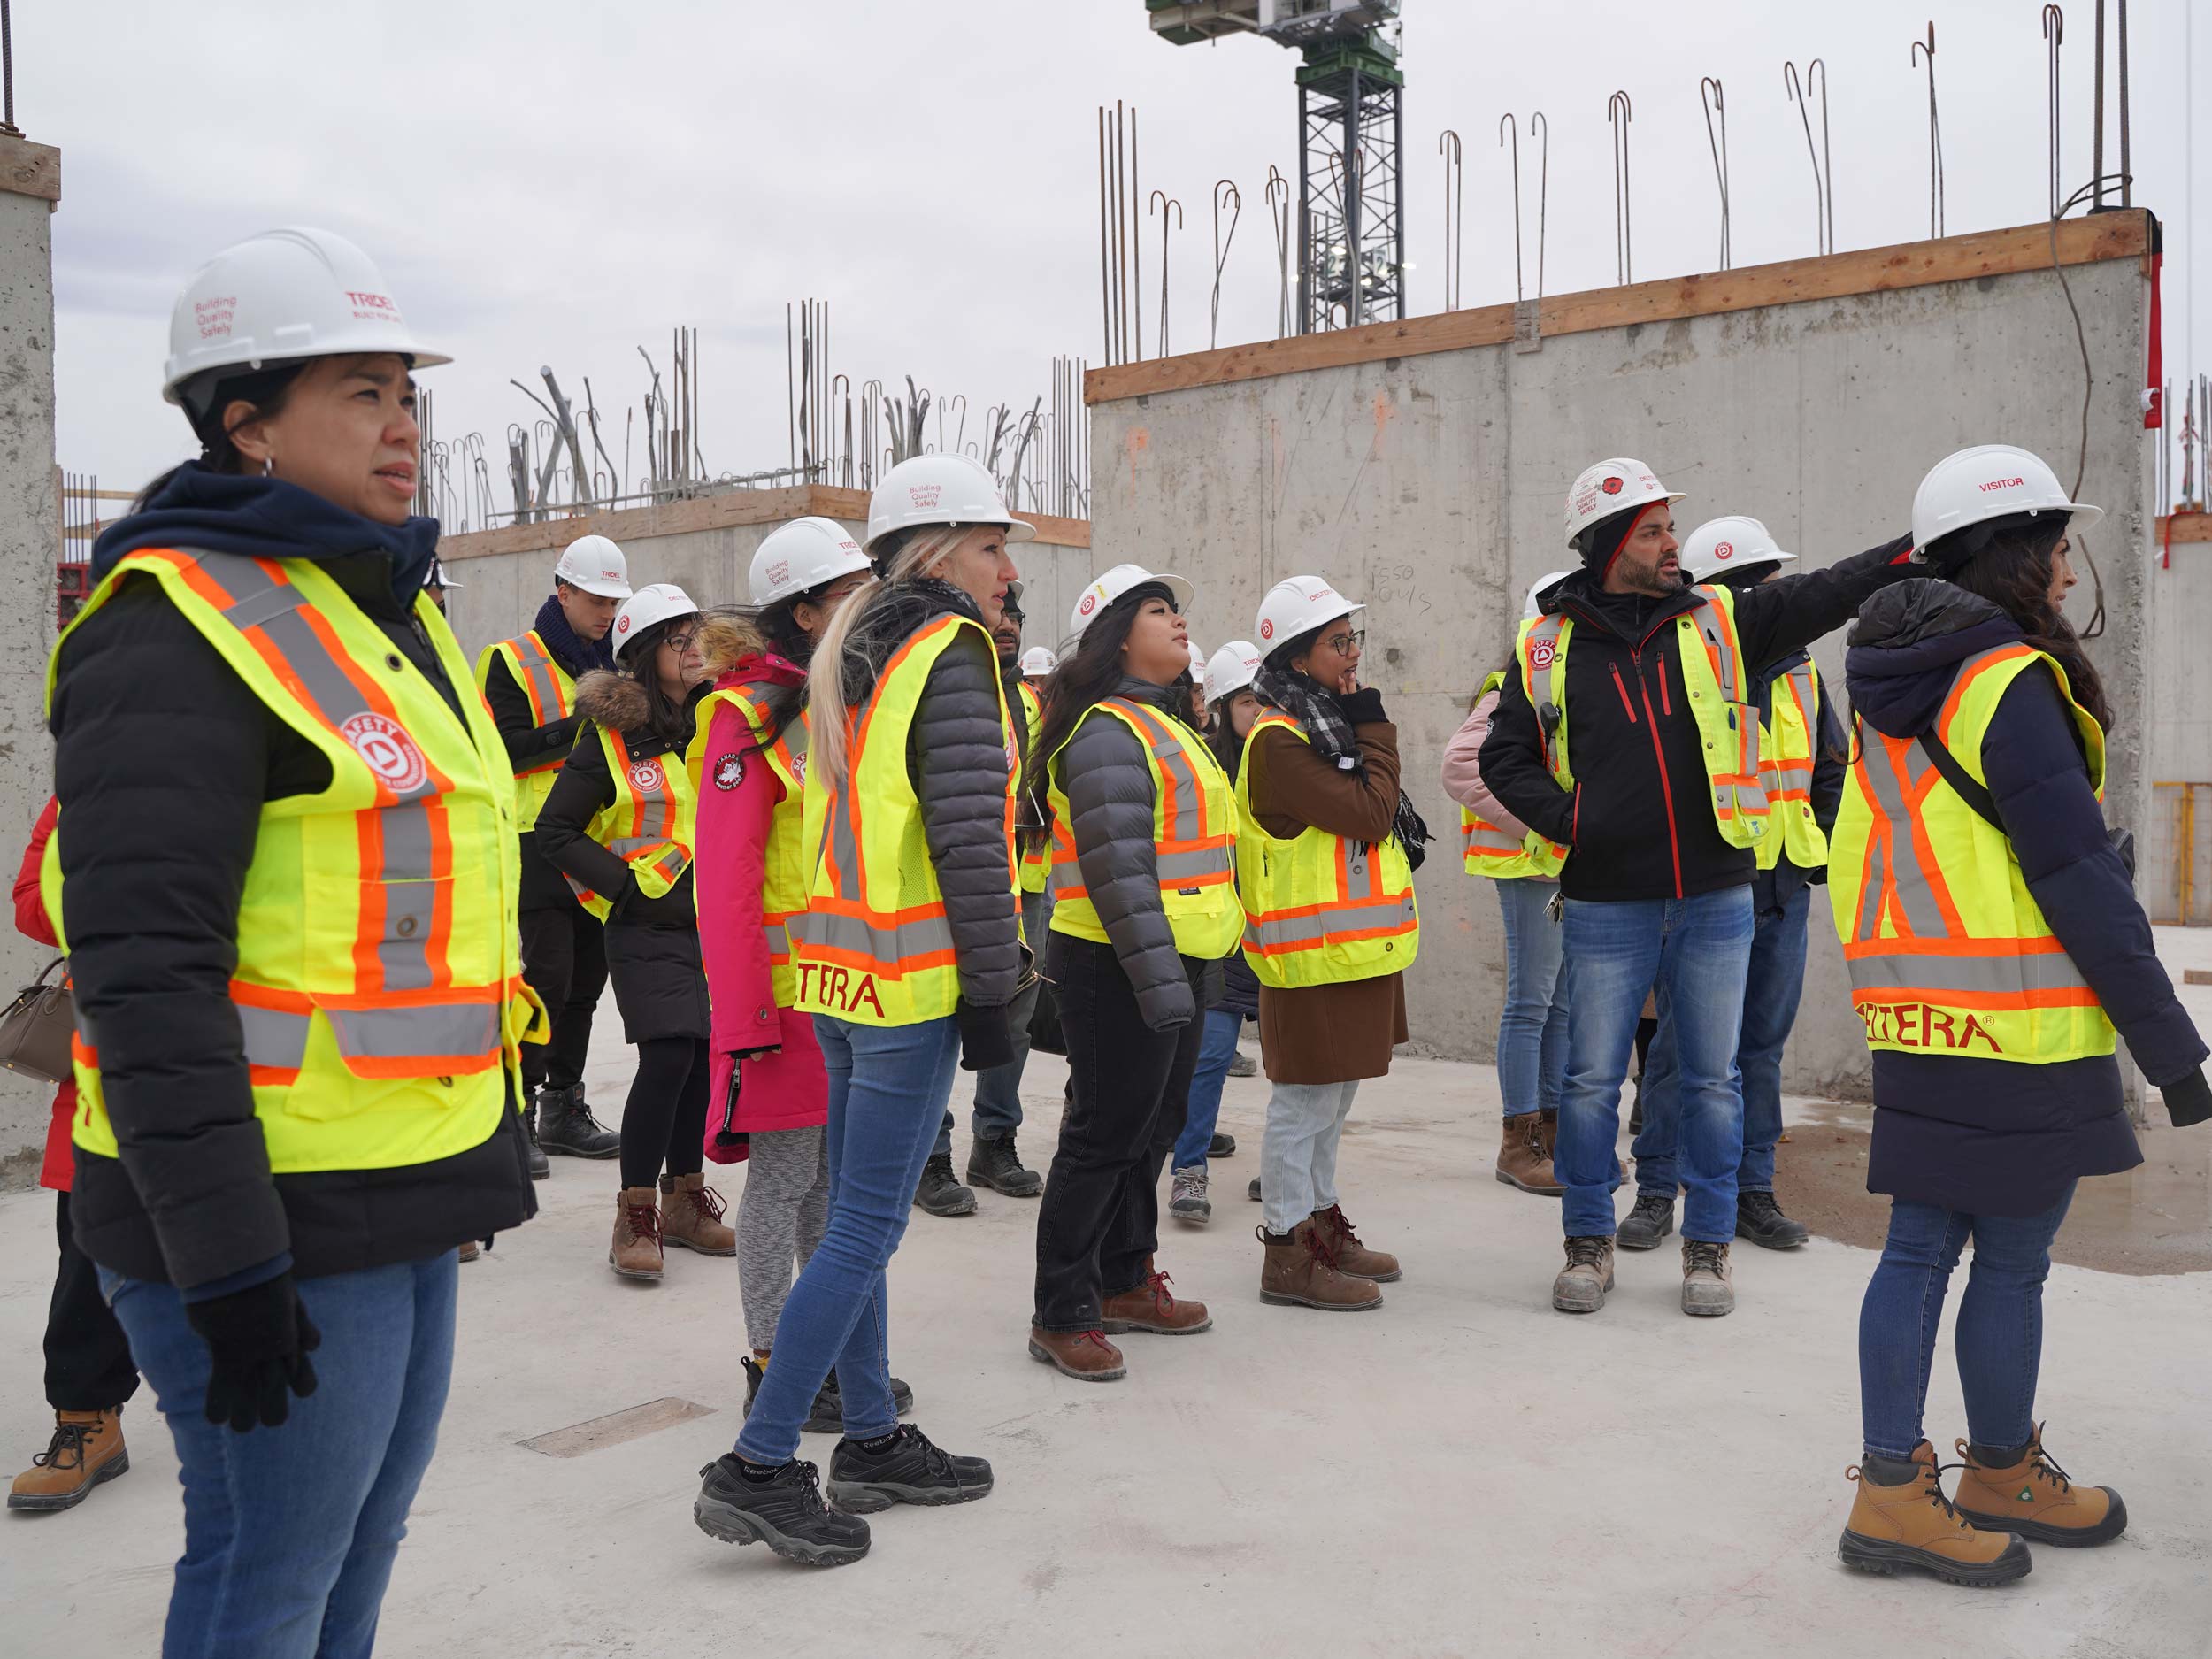 Tridel staff on construction site